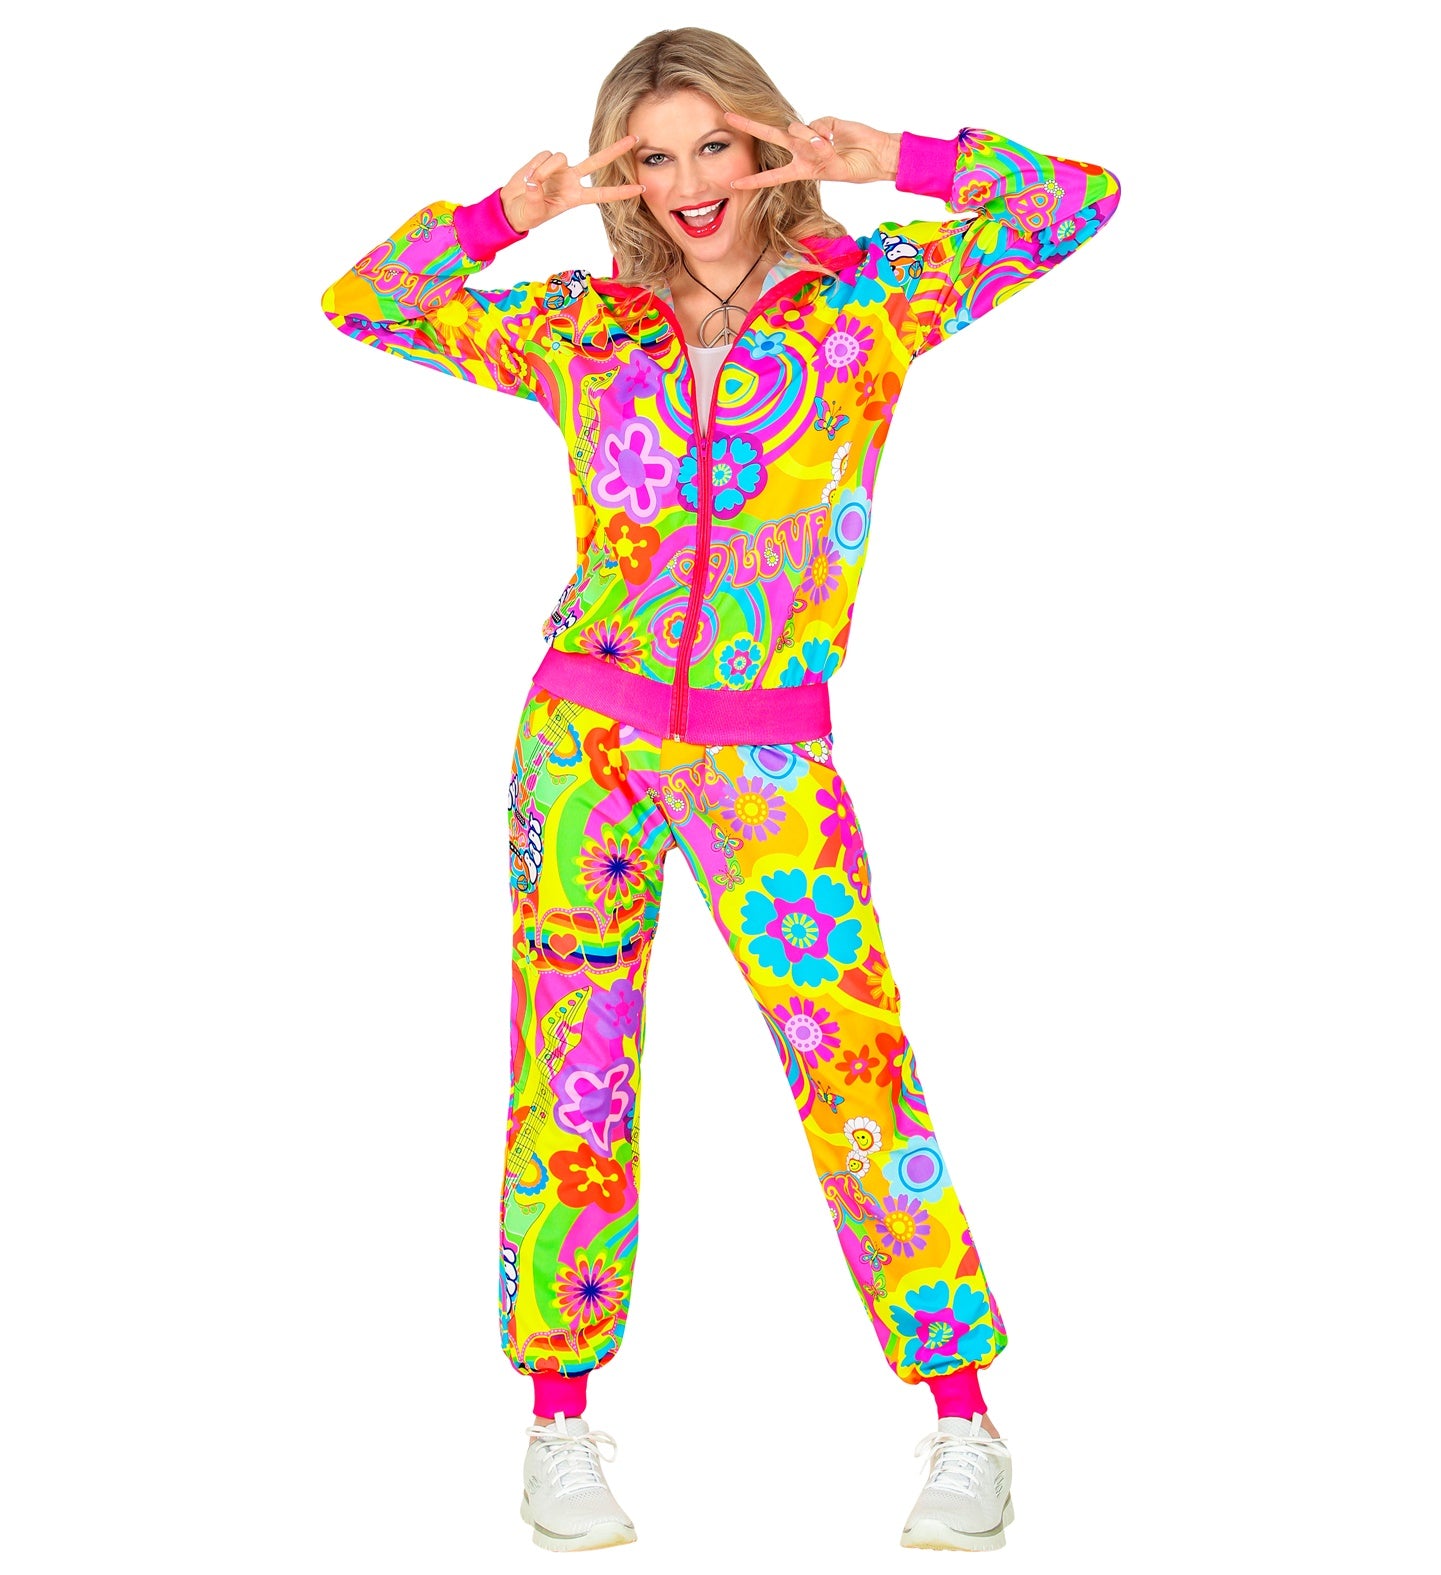 Groovy Love Hippie Tracksuit Costume for women